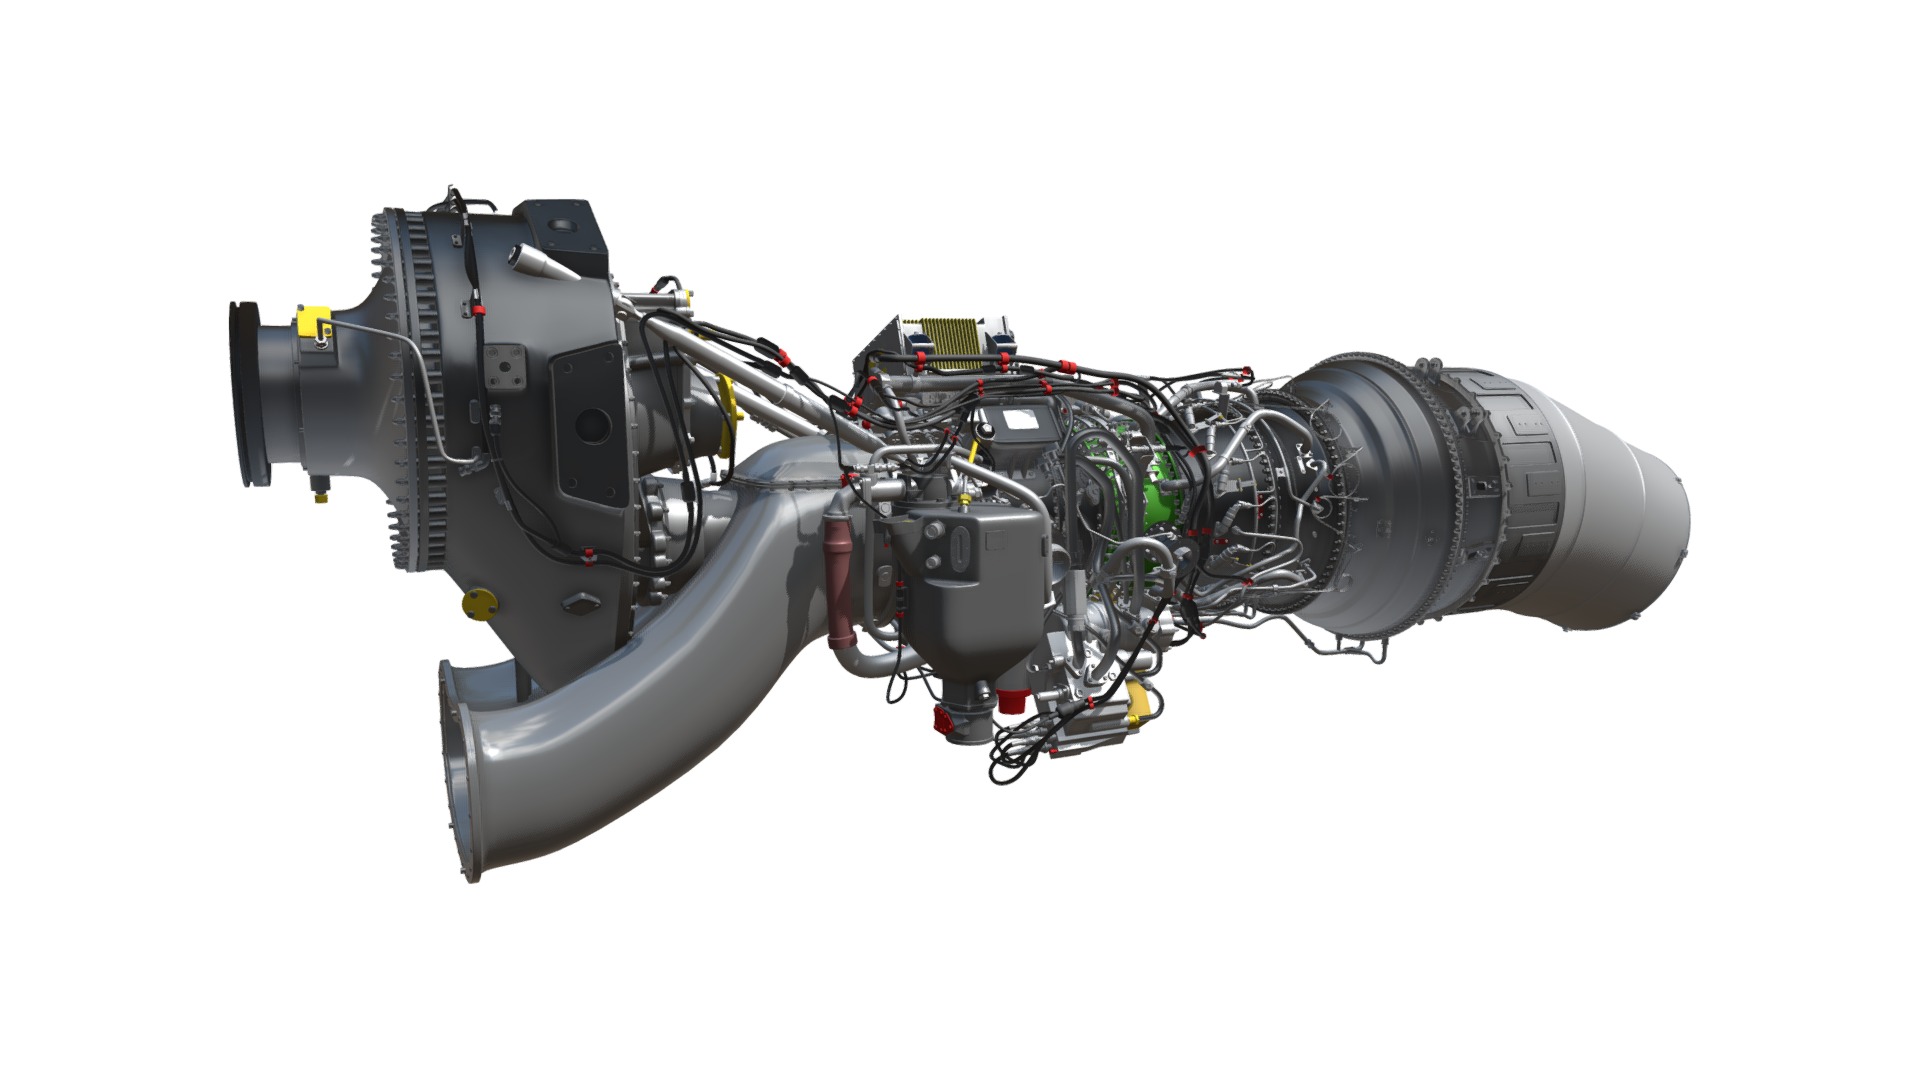 3D model Europrop TP400-D6 Turboprop Engine - This is a 3D model of the Europrop TP400-D6 Turboprop Engine. The 3D model is about diagram.